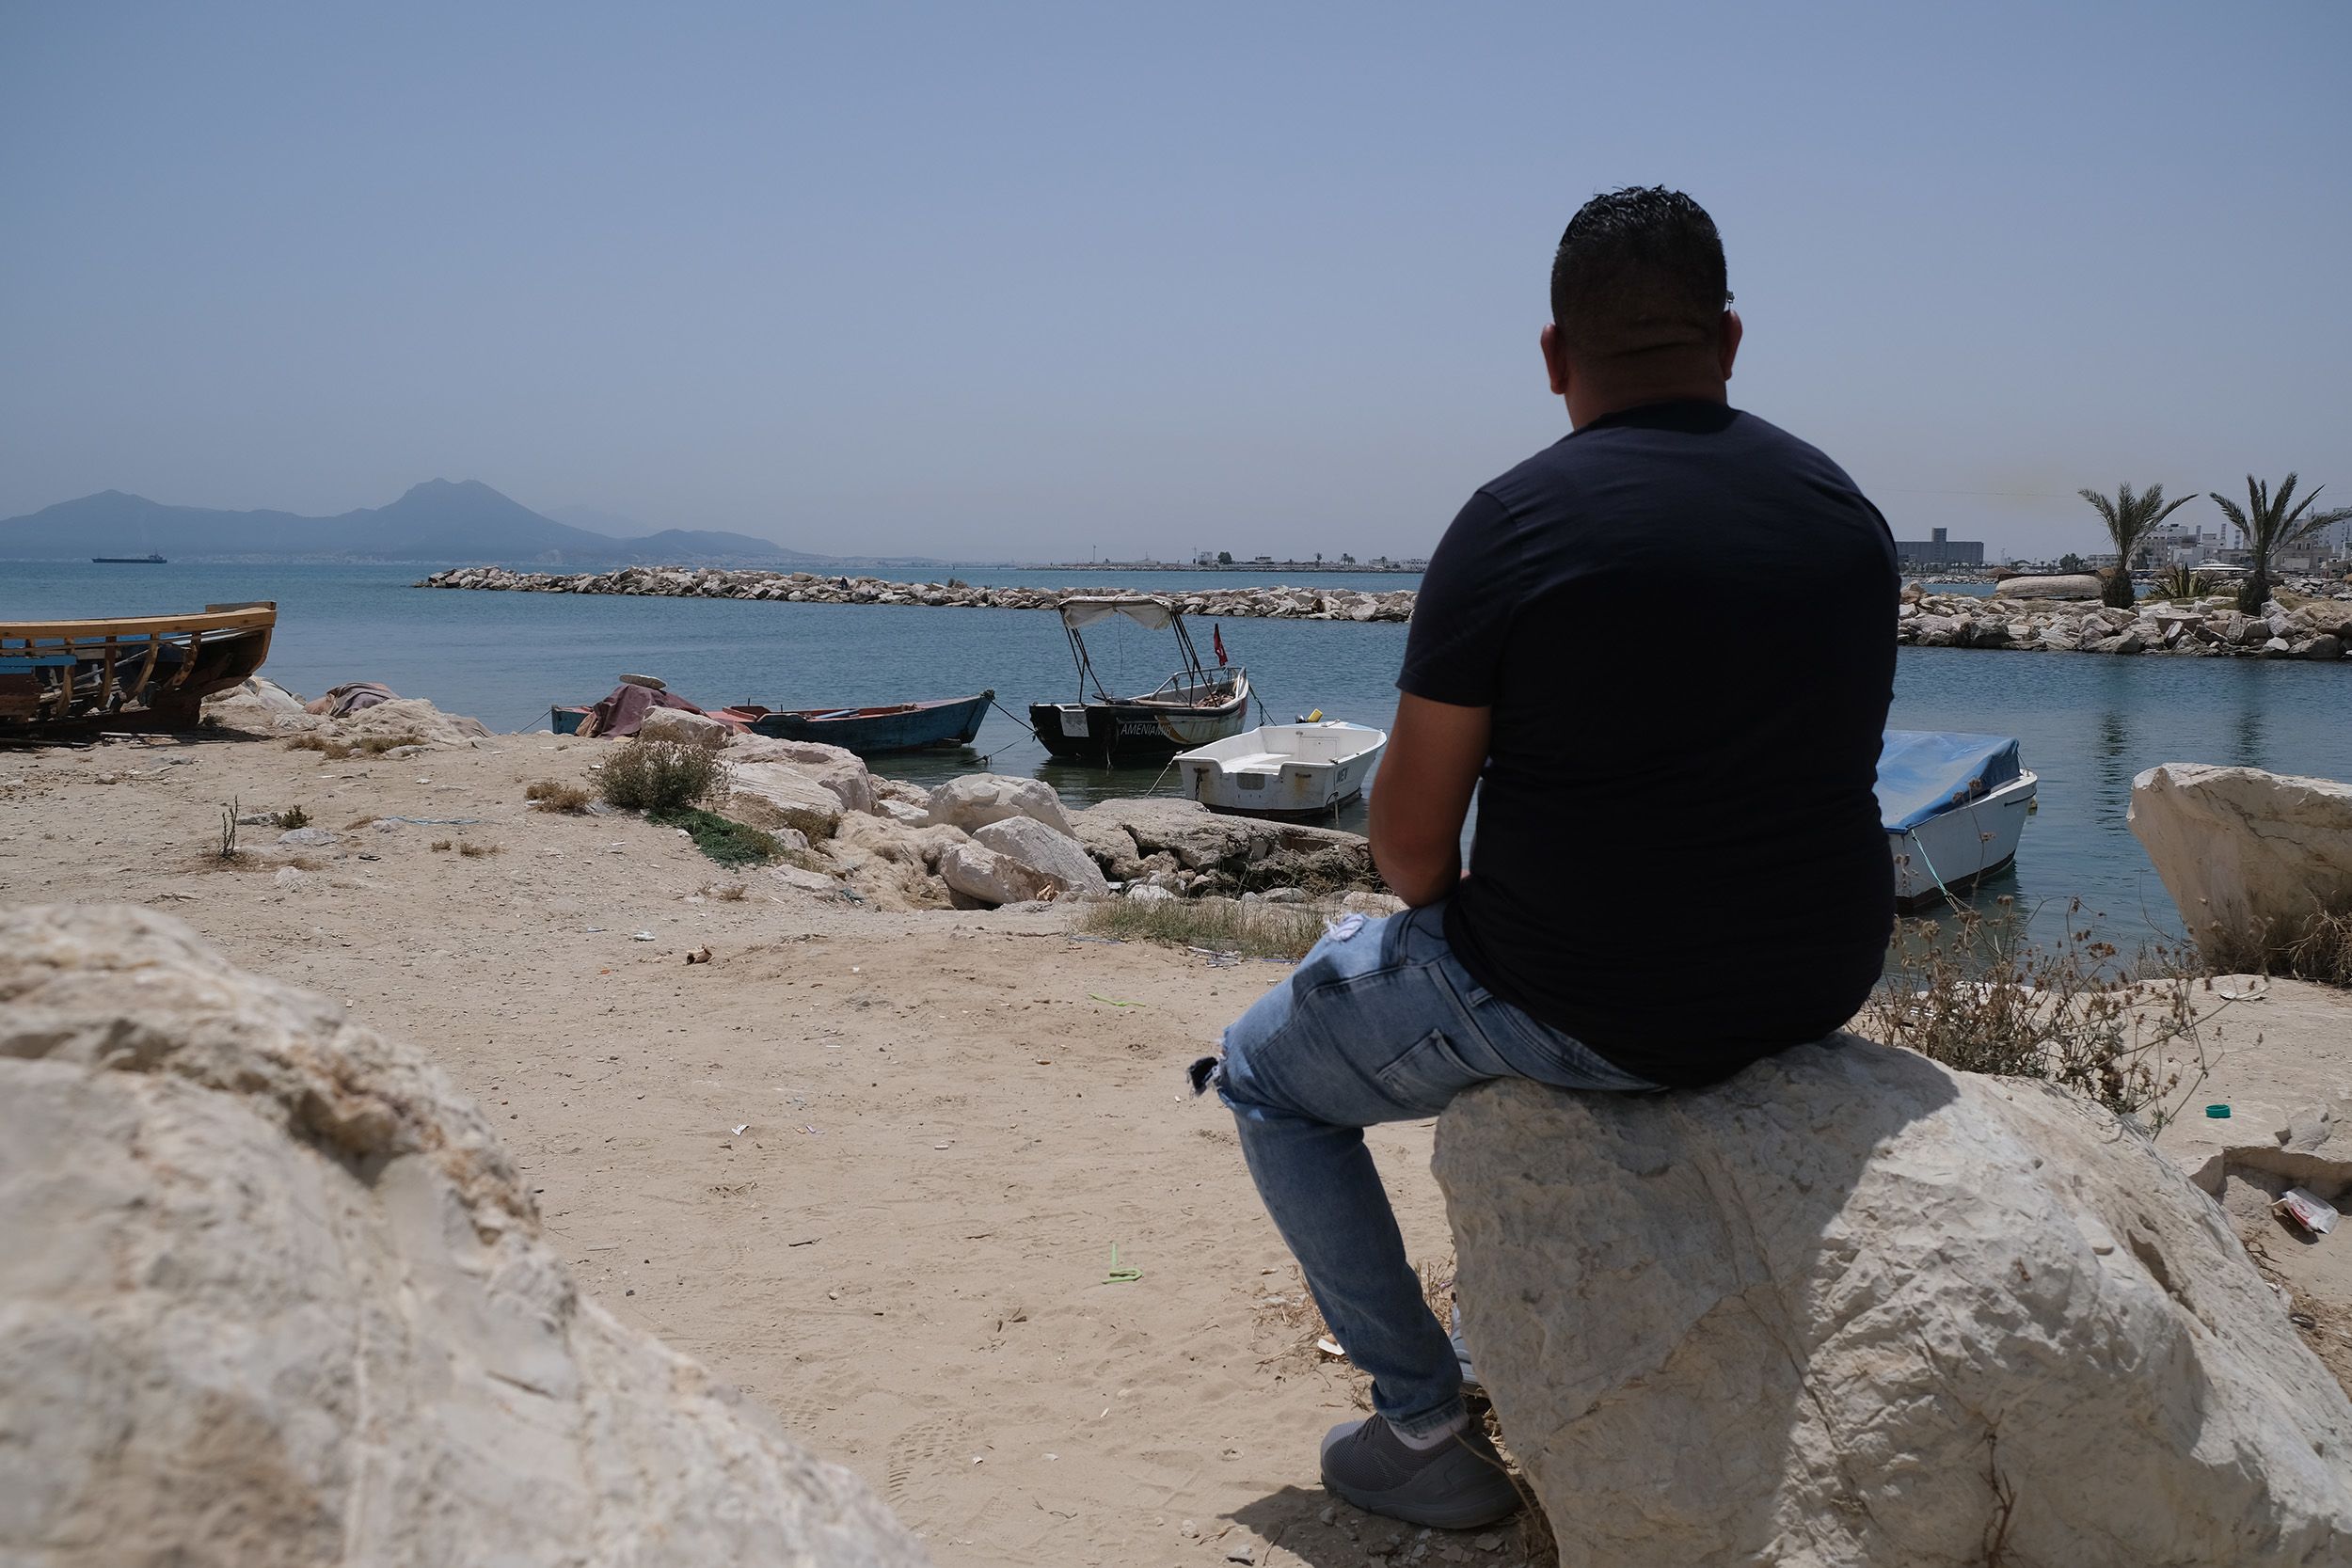 The New Humanitarian  A 'fishing crisis' and migration collide on  Tunisia's shores